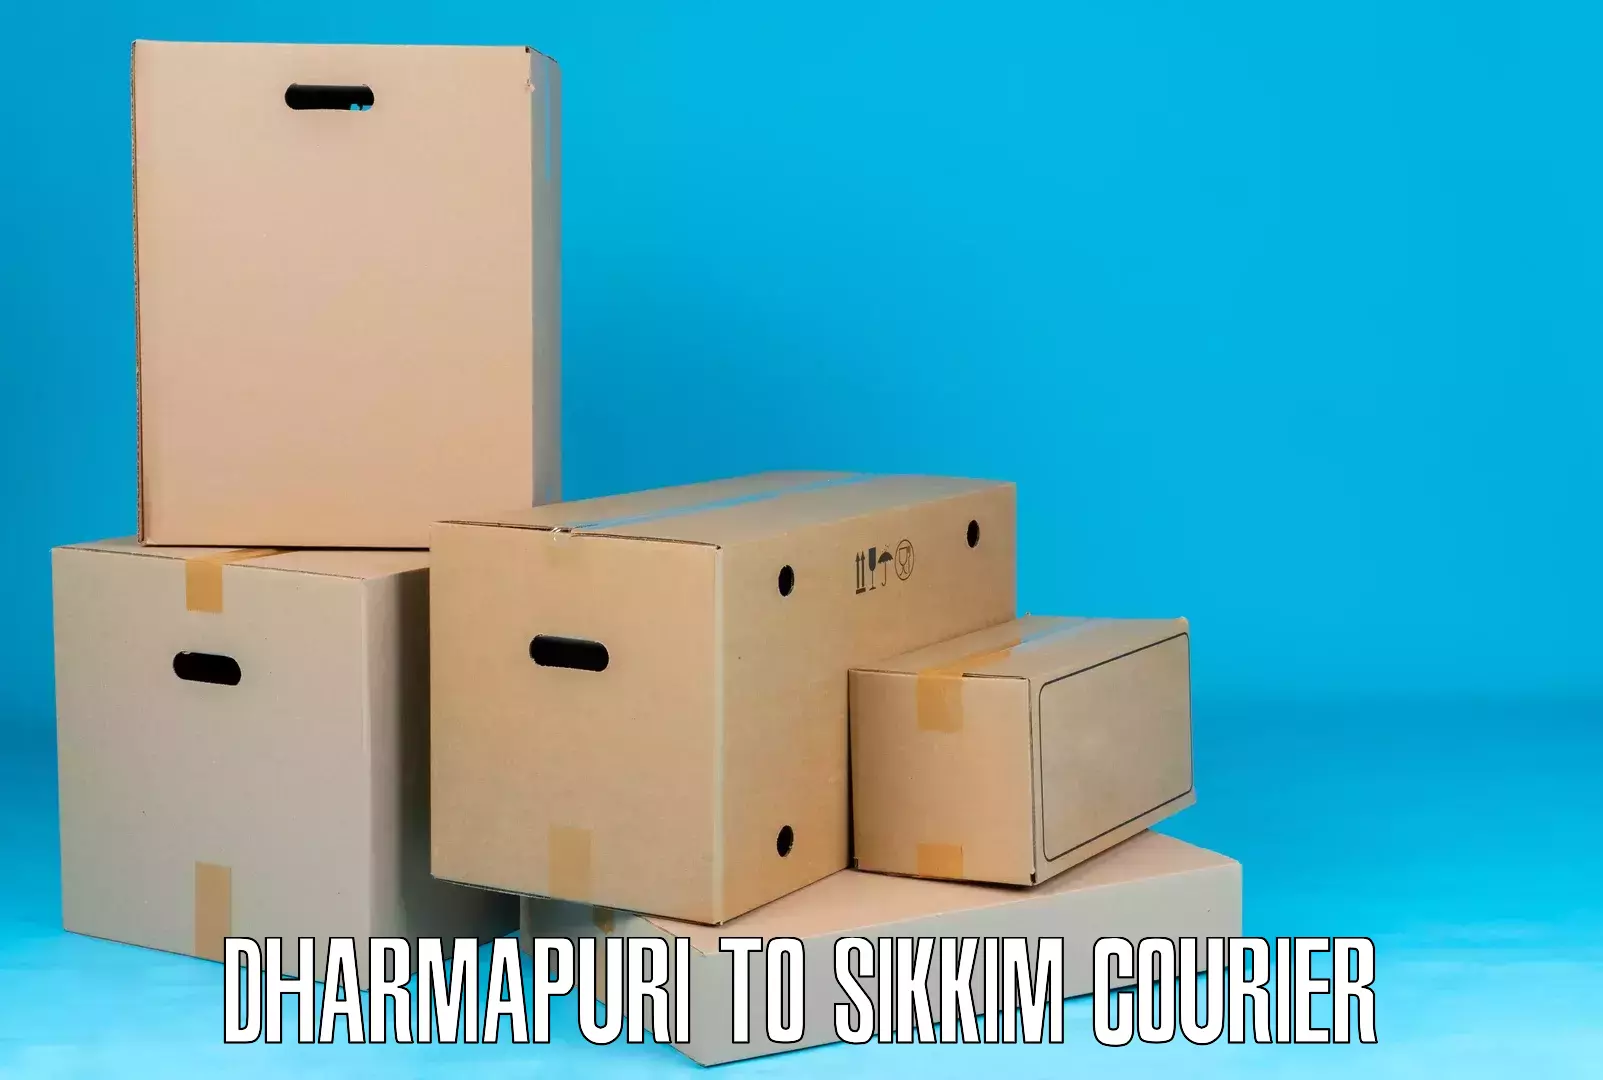 Courier service partnerships Dharmapuri to Pelling